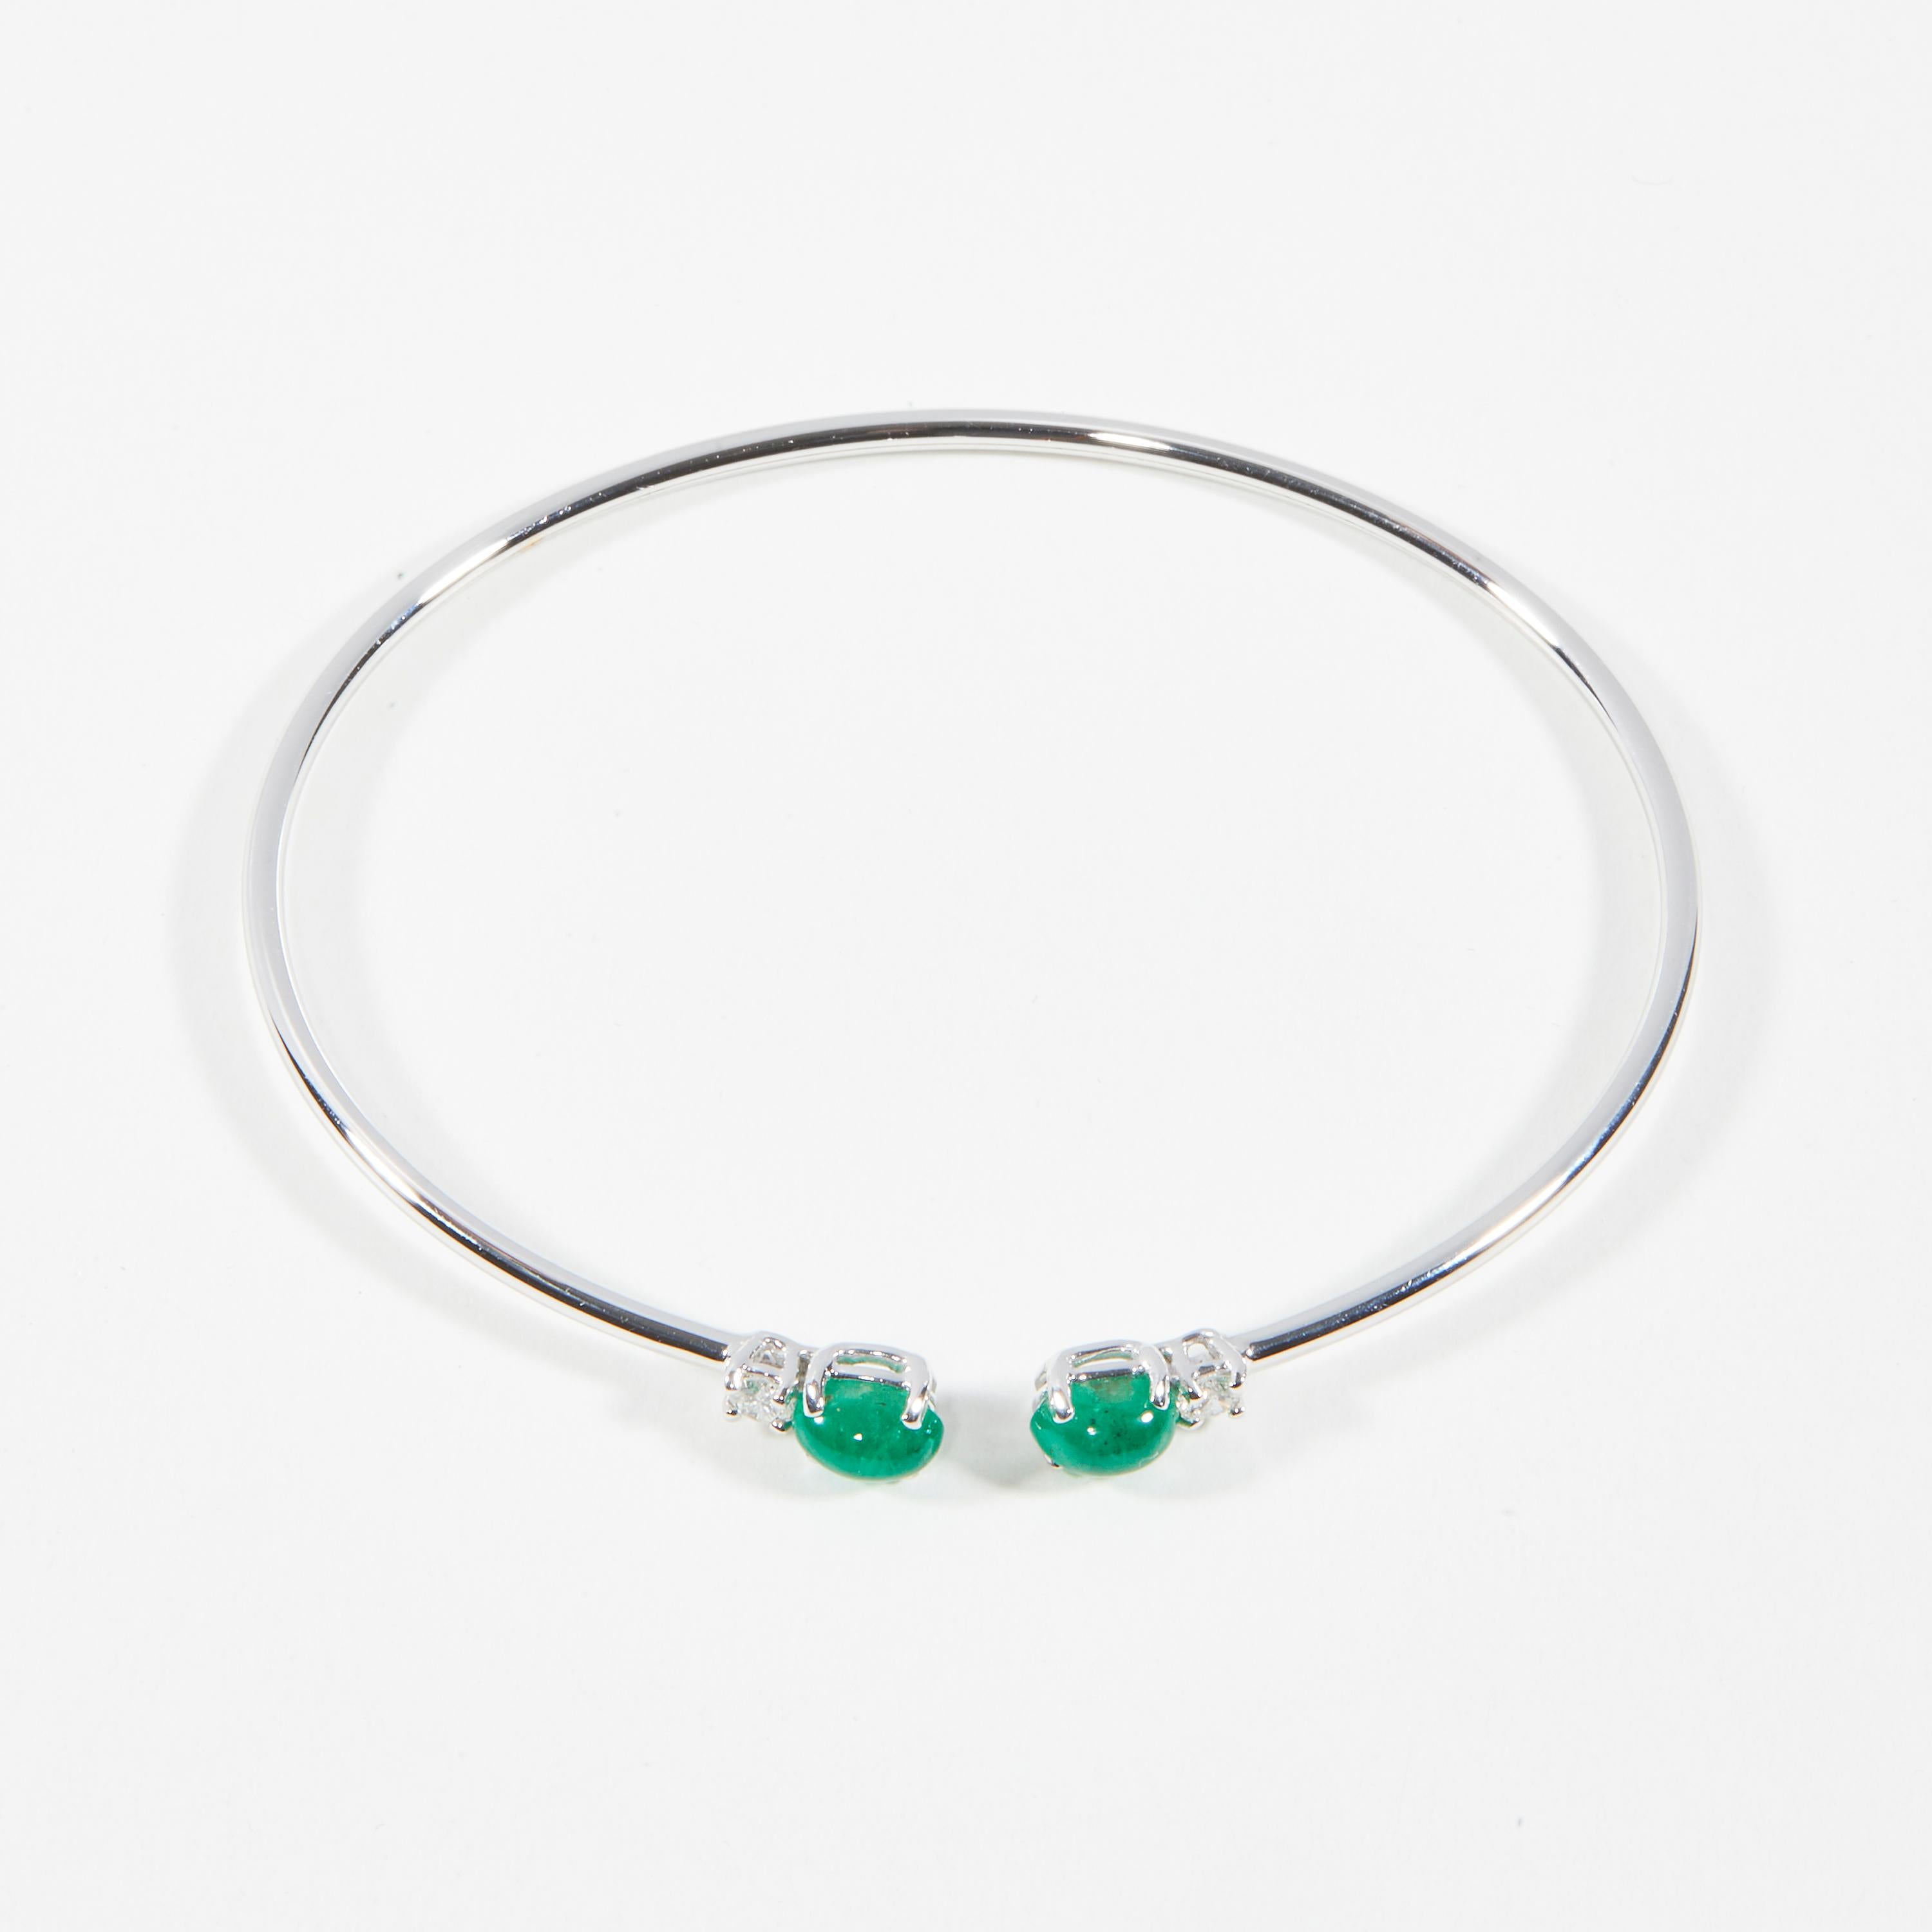 18 Karat White Gold Diamond and Emerald Bracelet

2 Diamonds 0.16 Carat H SI
2 Emeralds 1,18 Carat
5,5 x 5.0 cm


Founded in 1974, Gianni Lazzaro is a family-owned jewelry company based out of Düsseldorf, Germany.
Although rooted in Germany, Gianni